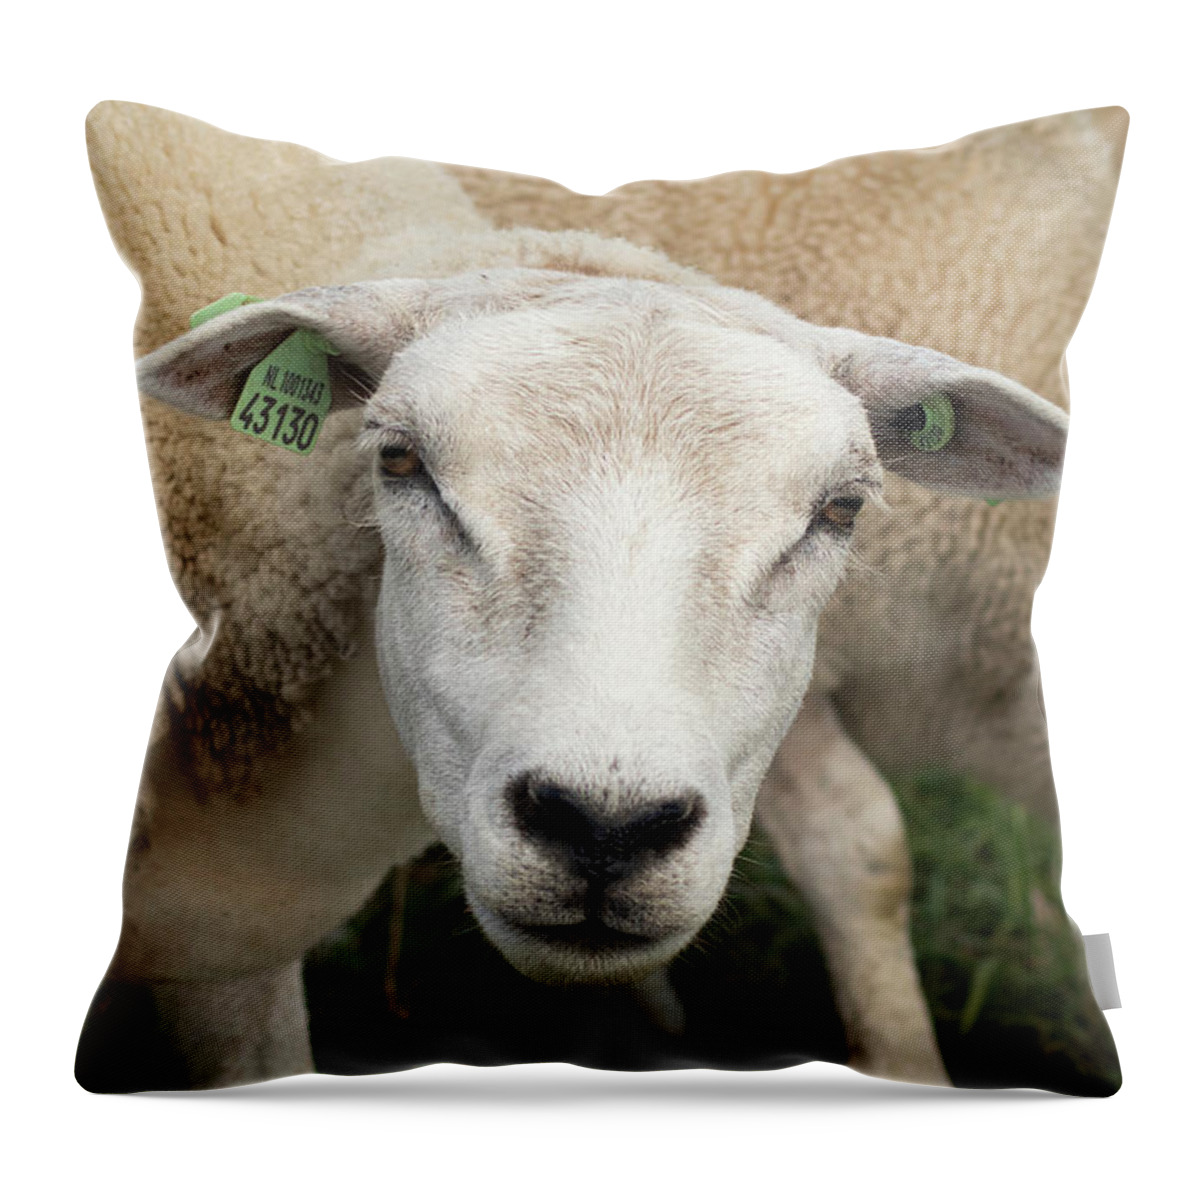 Sheep Throw Pillow featuring the photograph Sheep by MPhotographer